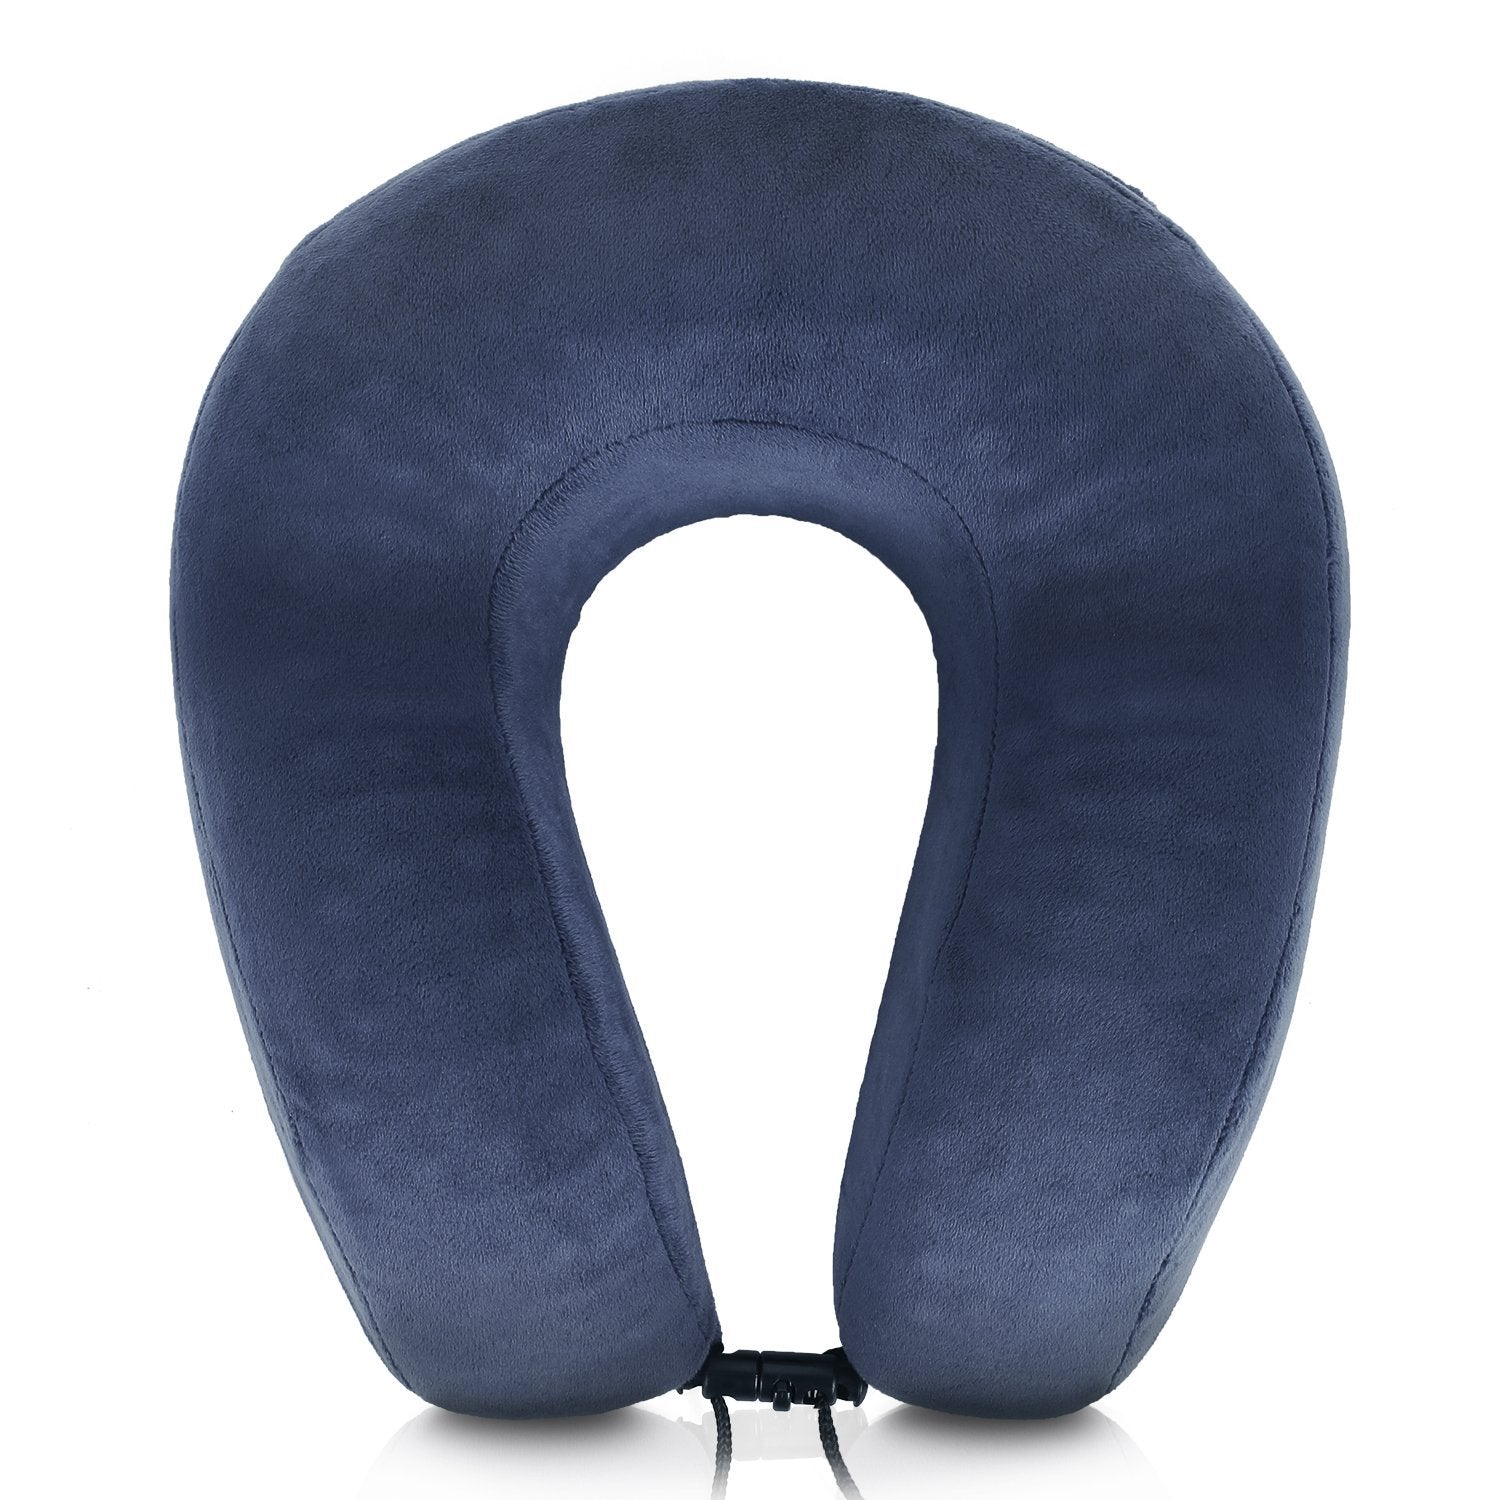 Load image into Gallery viewer, Naipo Soft Memory Foam Travel Pillow Neck Pillow - NAIPO
